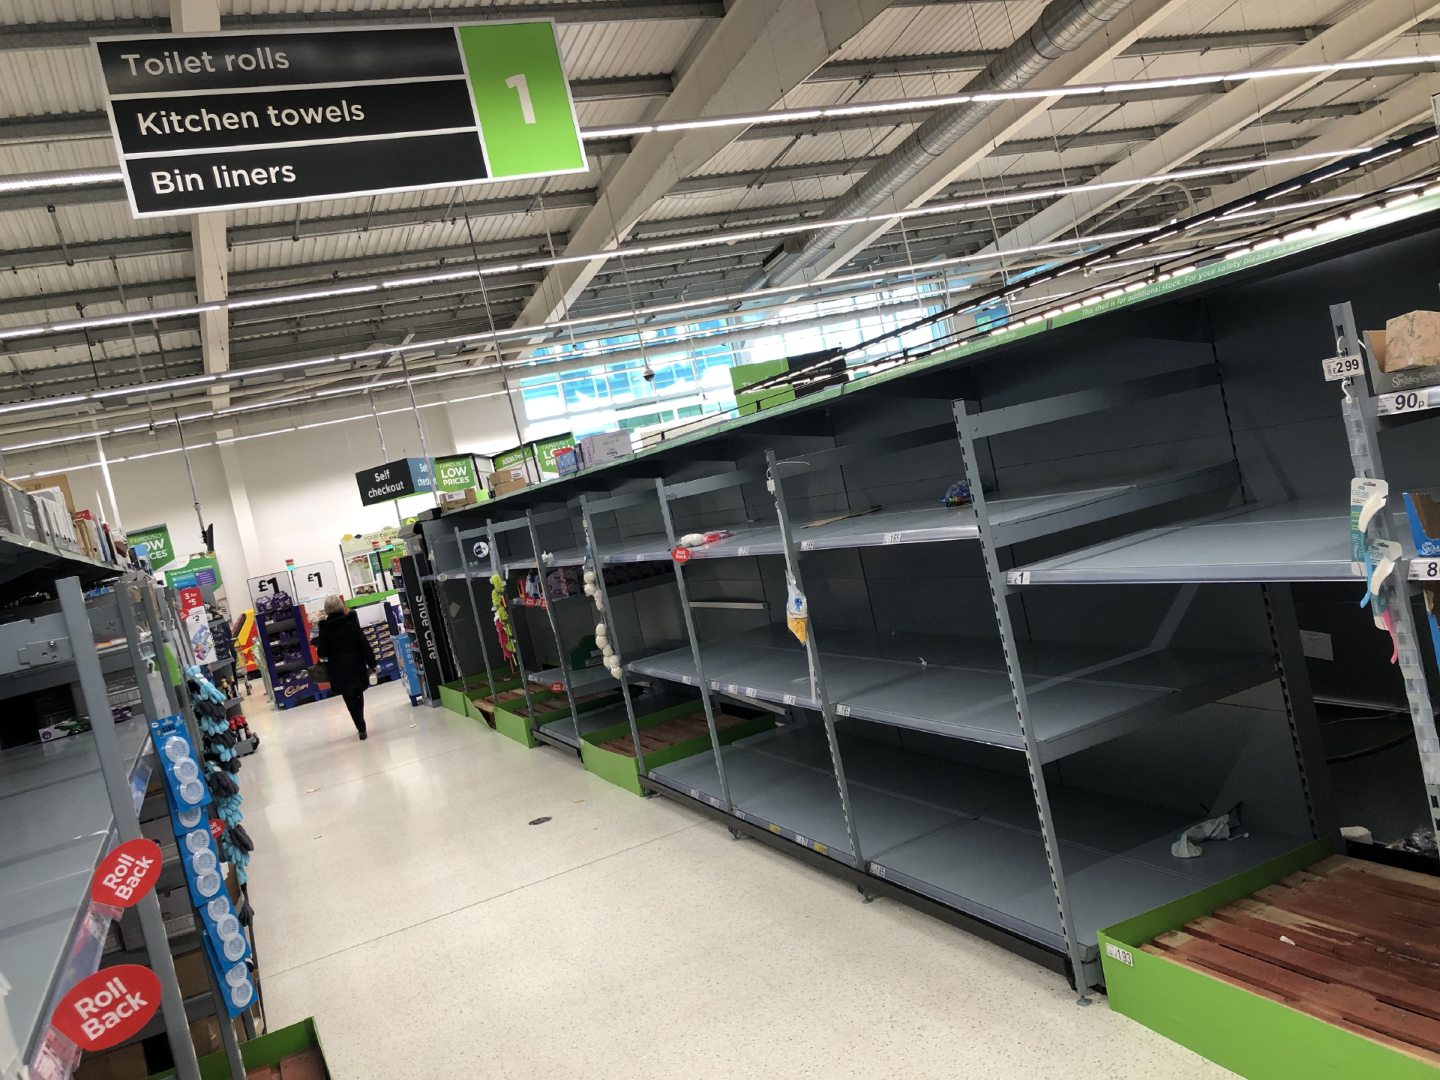 While many supermarkets have restocked, scenes like this have not helped foodbanks.